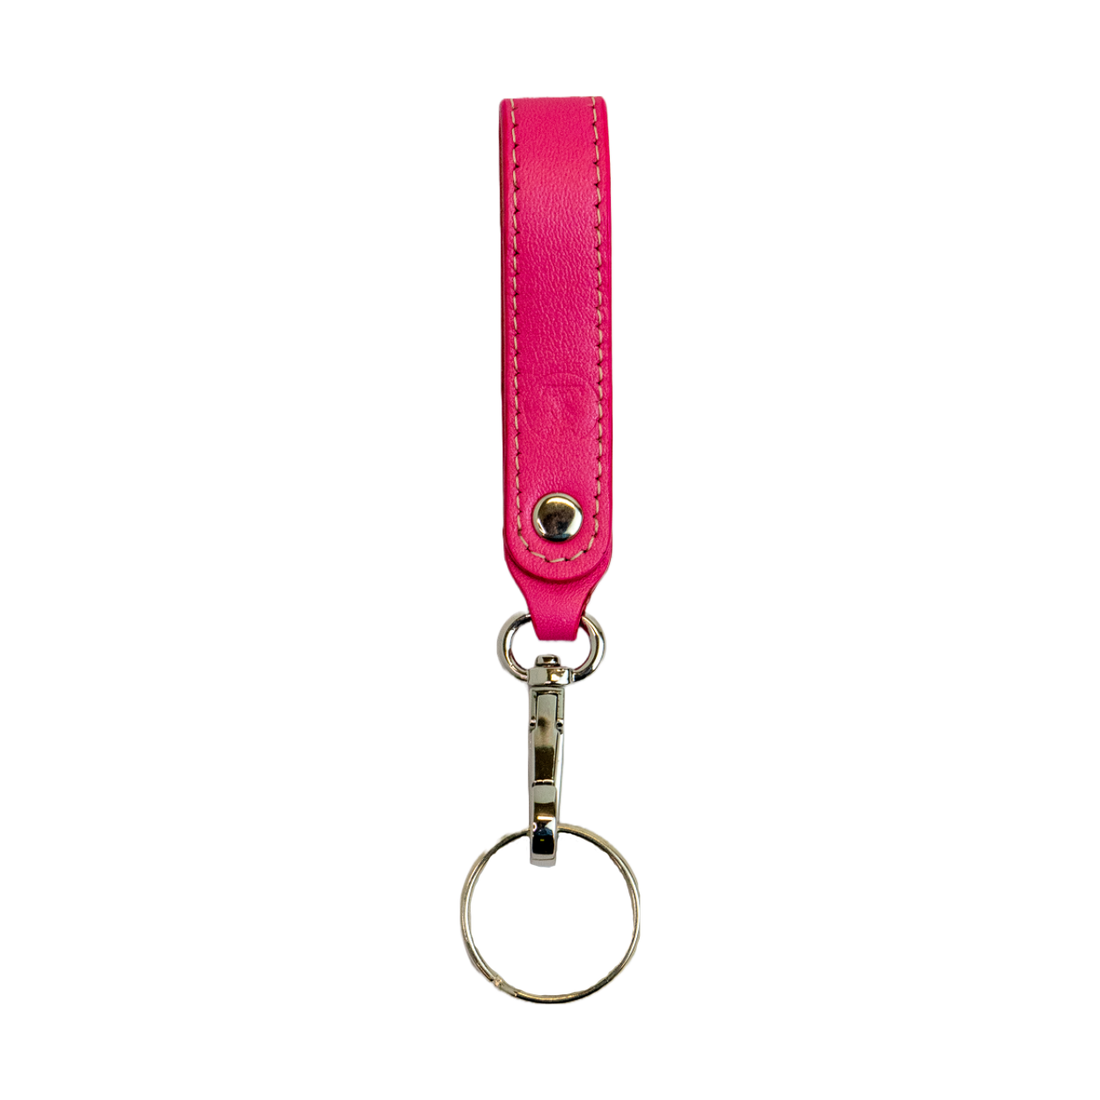 T5 Key chain strap handcrafted by designer Liv McClintock in smooth calf leather in light frosted pink..